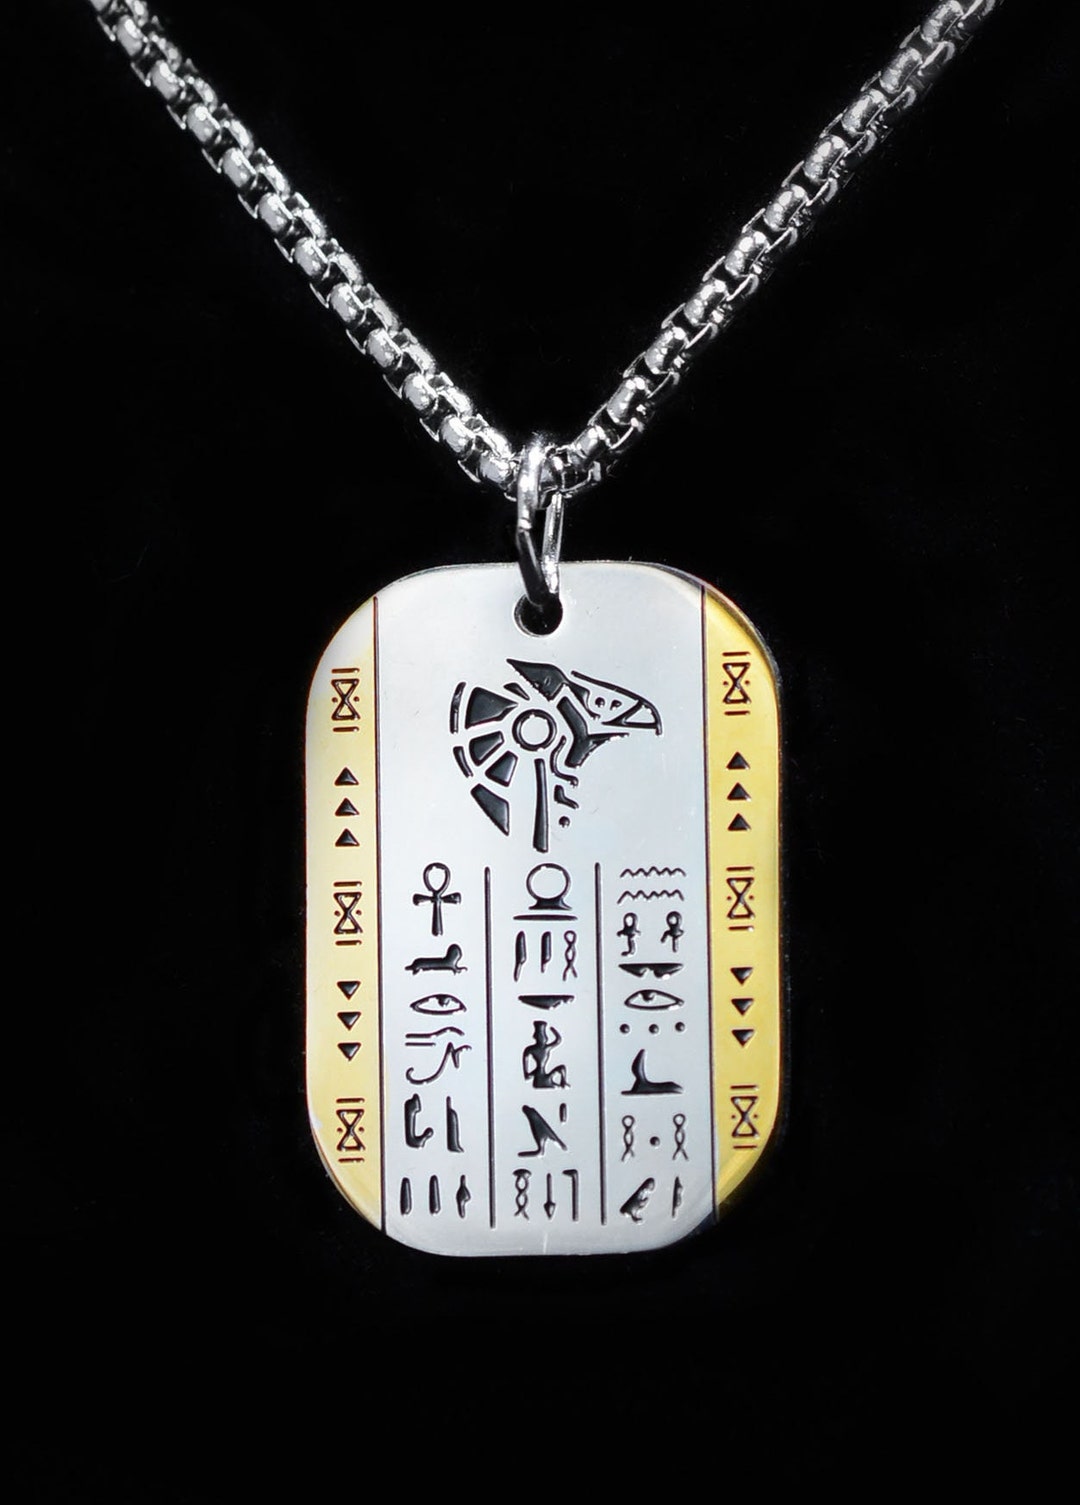 Silver Egyptian Hieroglyphics Dog Tag Charm Necklace unisex Gift ...